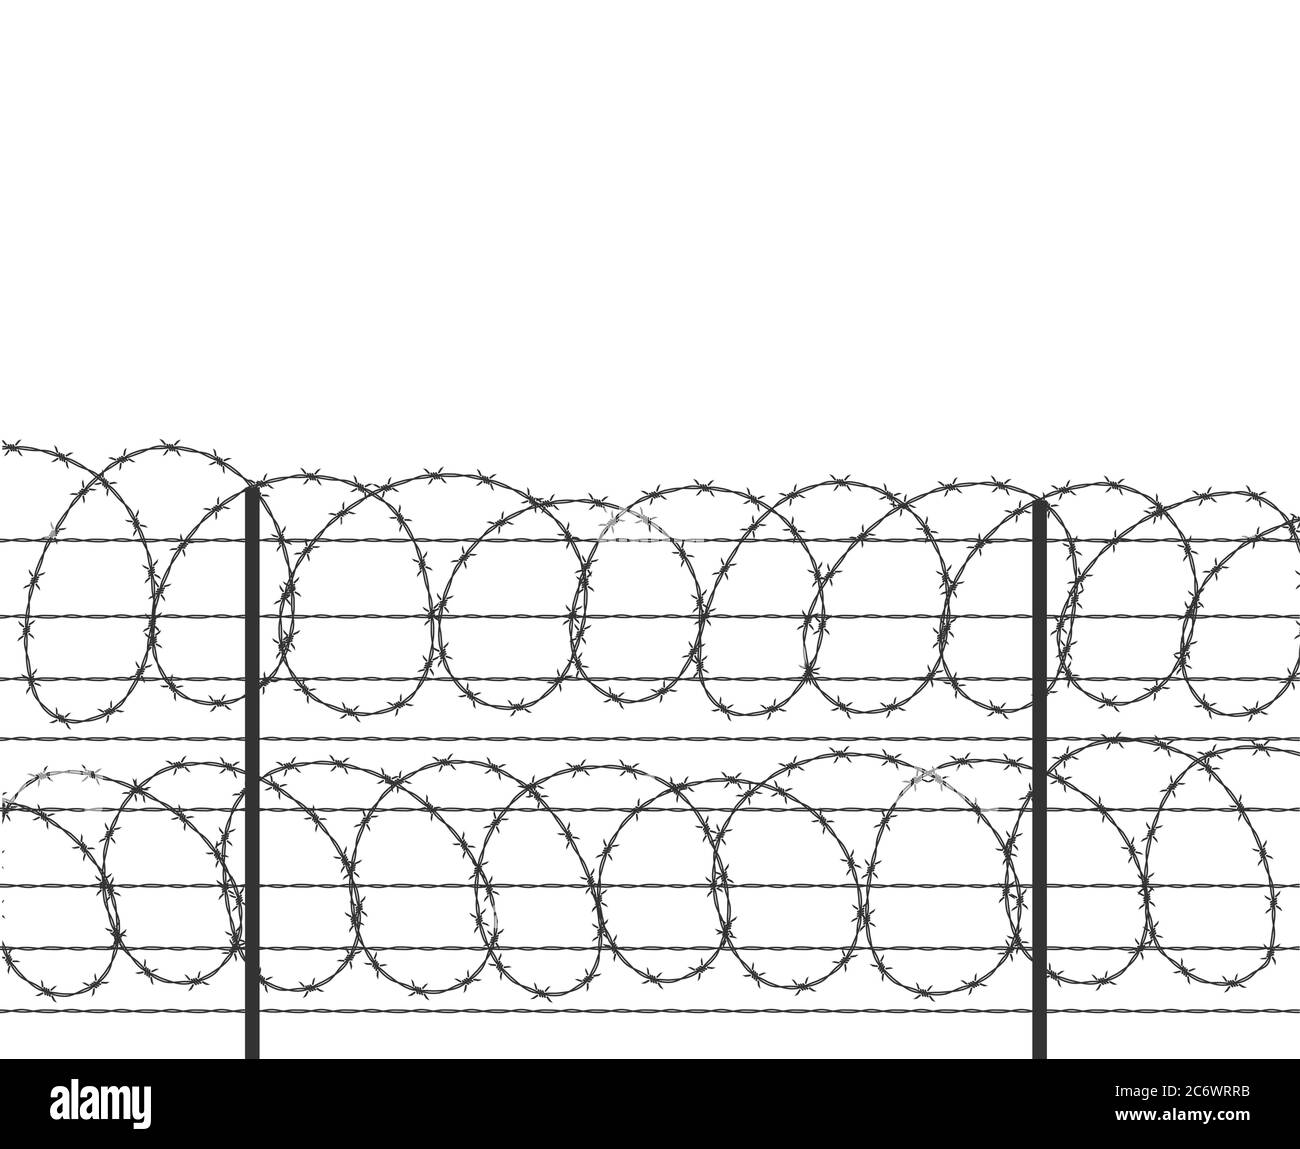 Military jail fence. Vector barbed spike wire. Safety metal net barrier. Prison iron gate security fencing. Simple graphic illustration Stock Vector